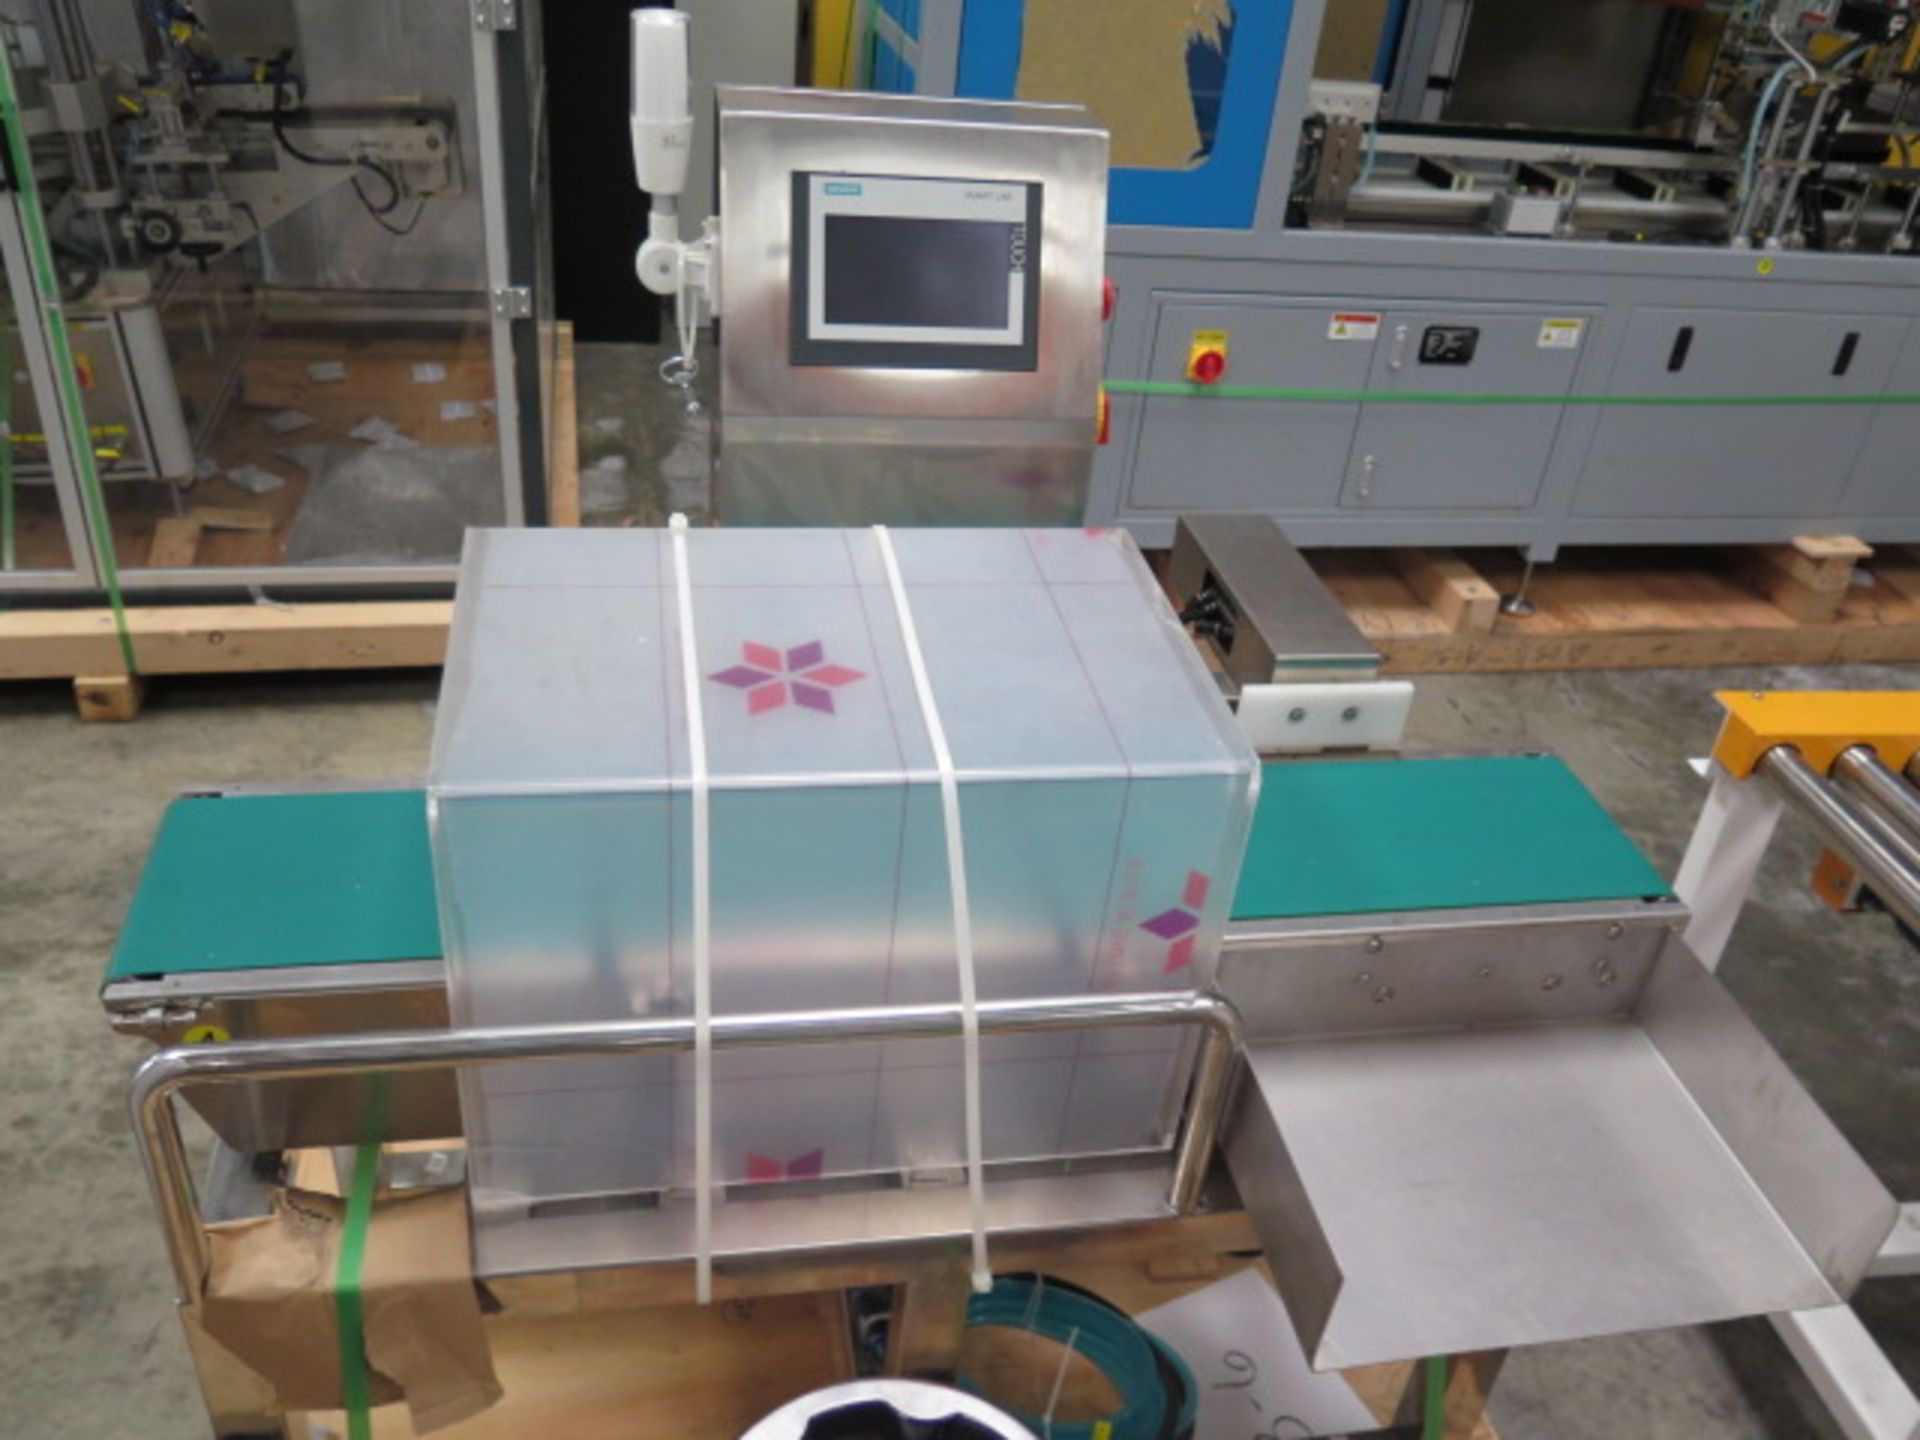 2022(NEW) Rongyu RY-ZH-80 Packaging Machine s/n220302 w/Siemens Smart Line Touch Controls,SOLD AS IS - Image 25 of 48